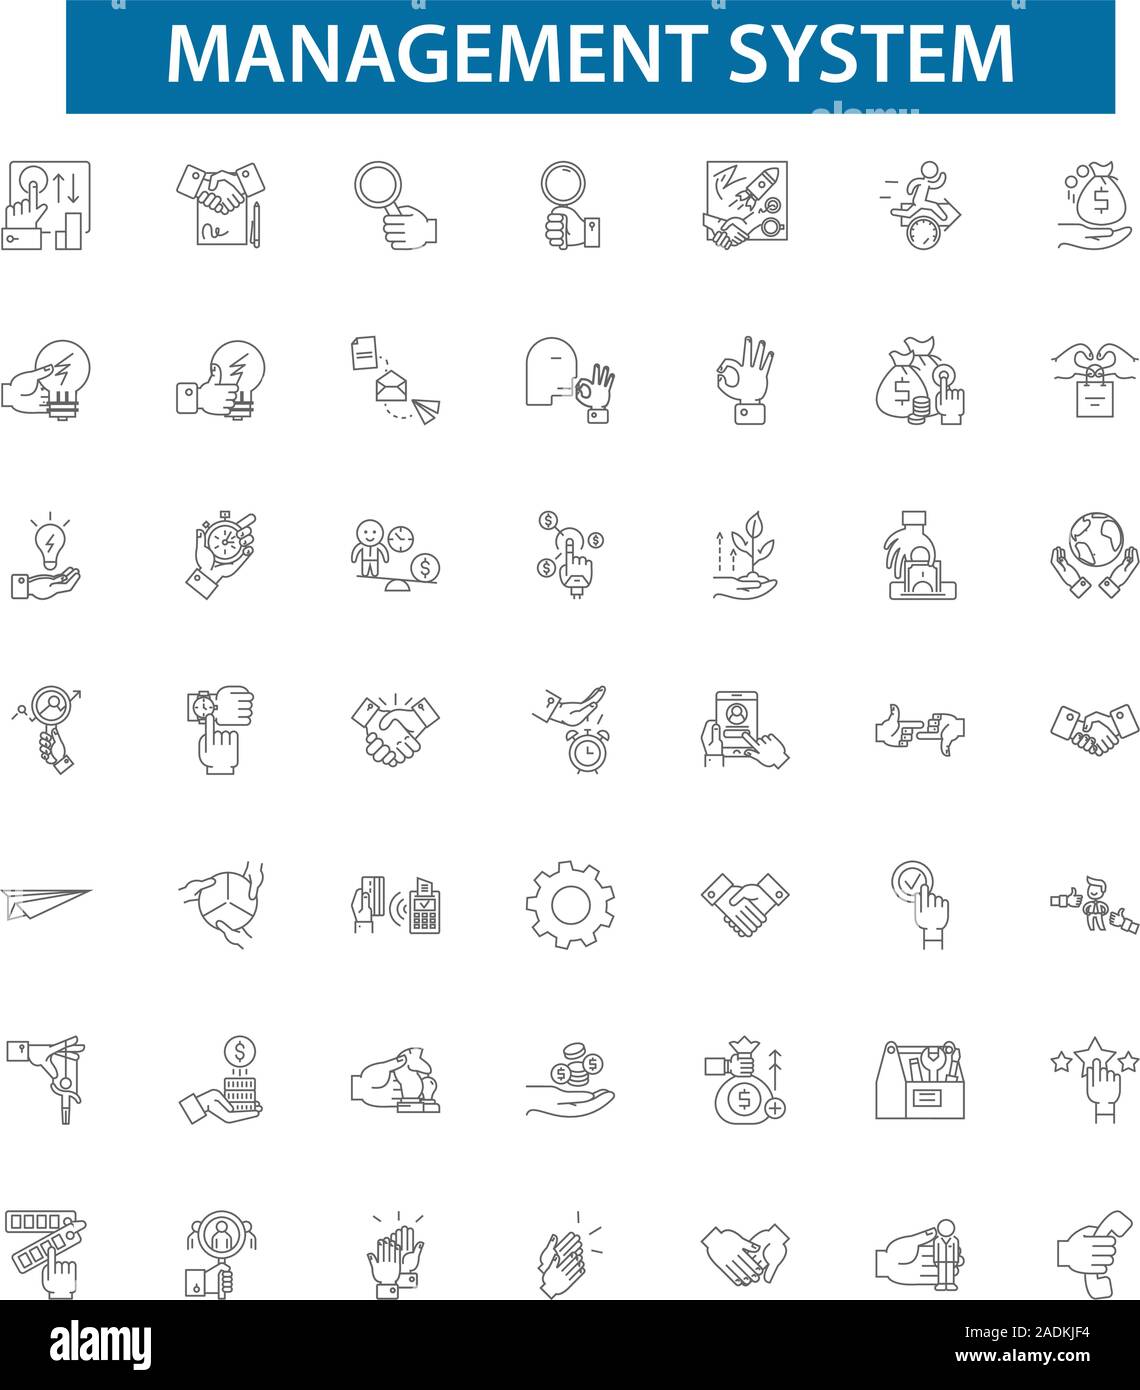 Management system.ai line icons, signs, symbols vector, linear illustration set Stock Vector